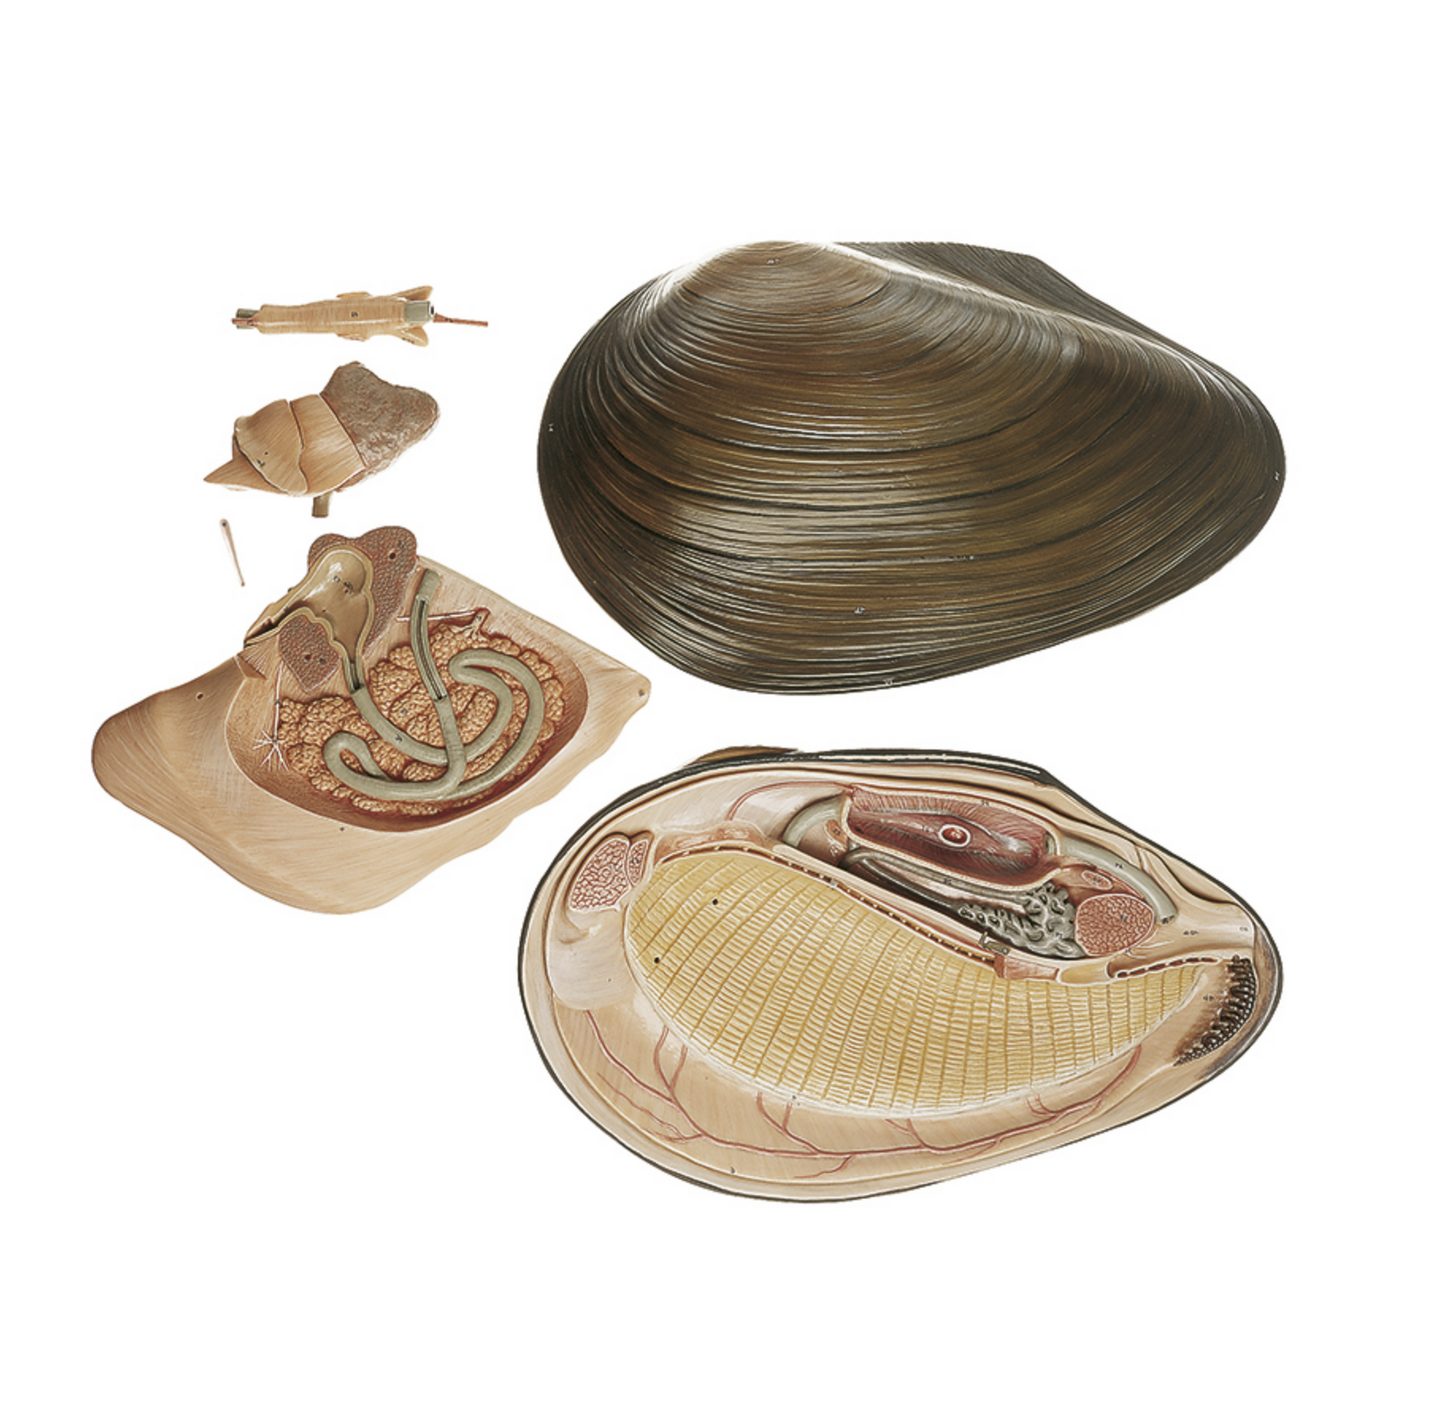 Model of a mussel (Anodonta cygnea) in the highest quality and enlarged. Can be separated into 5 parts